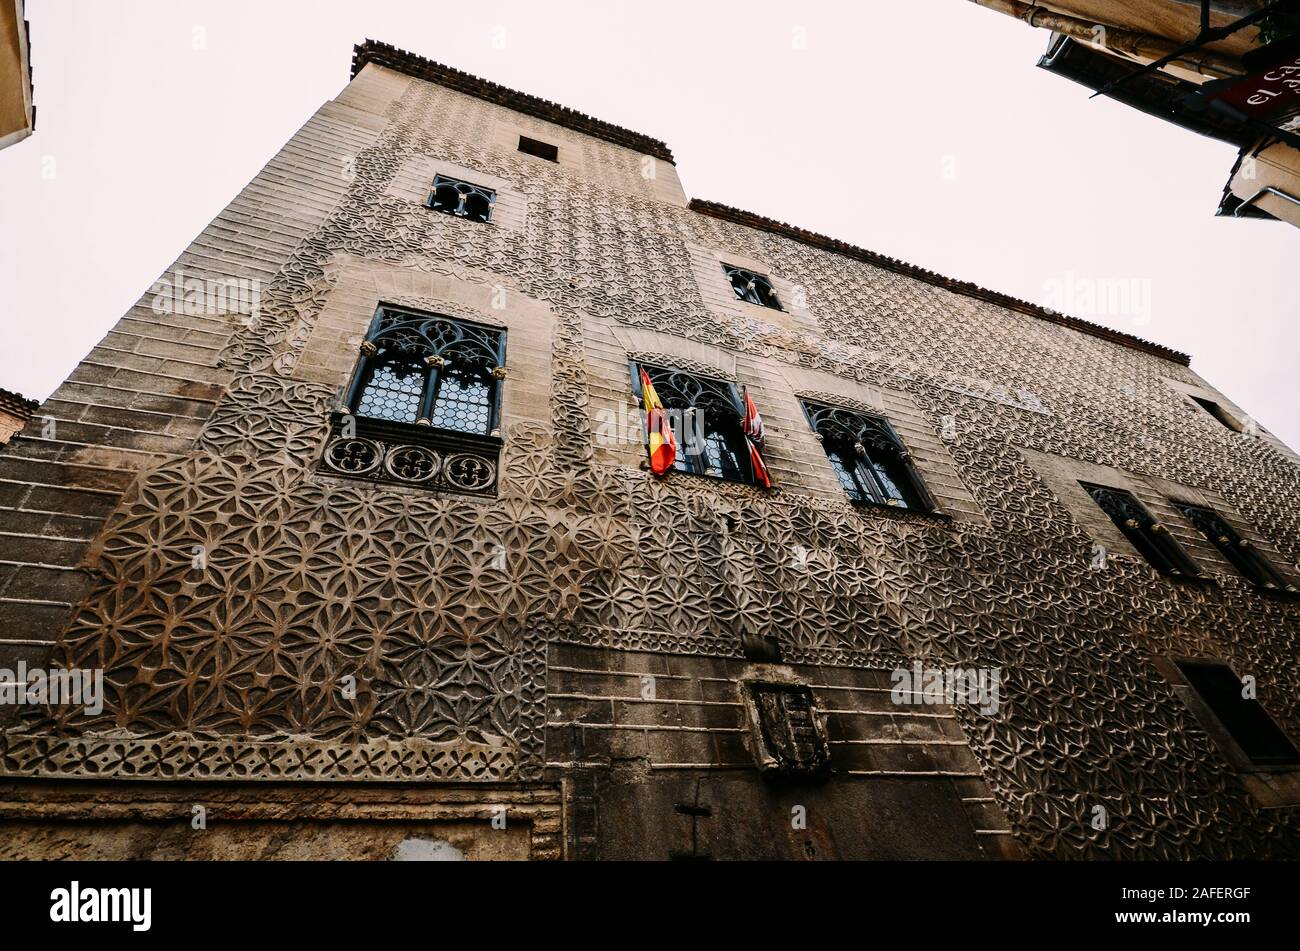 Segovia, Spain - Dec 8, 2019: Old buildings in Segovia, Spain decorated with unique patterns Stock Photo